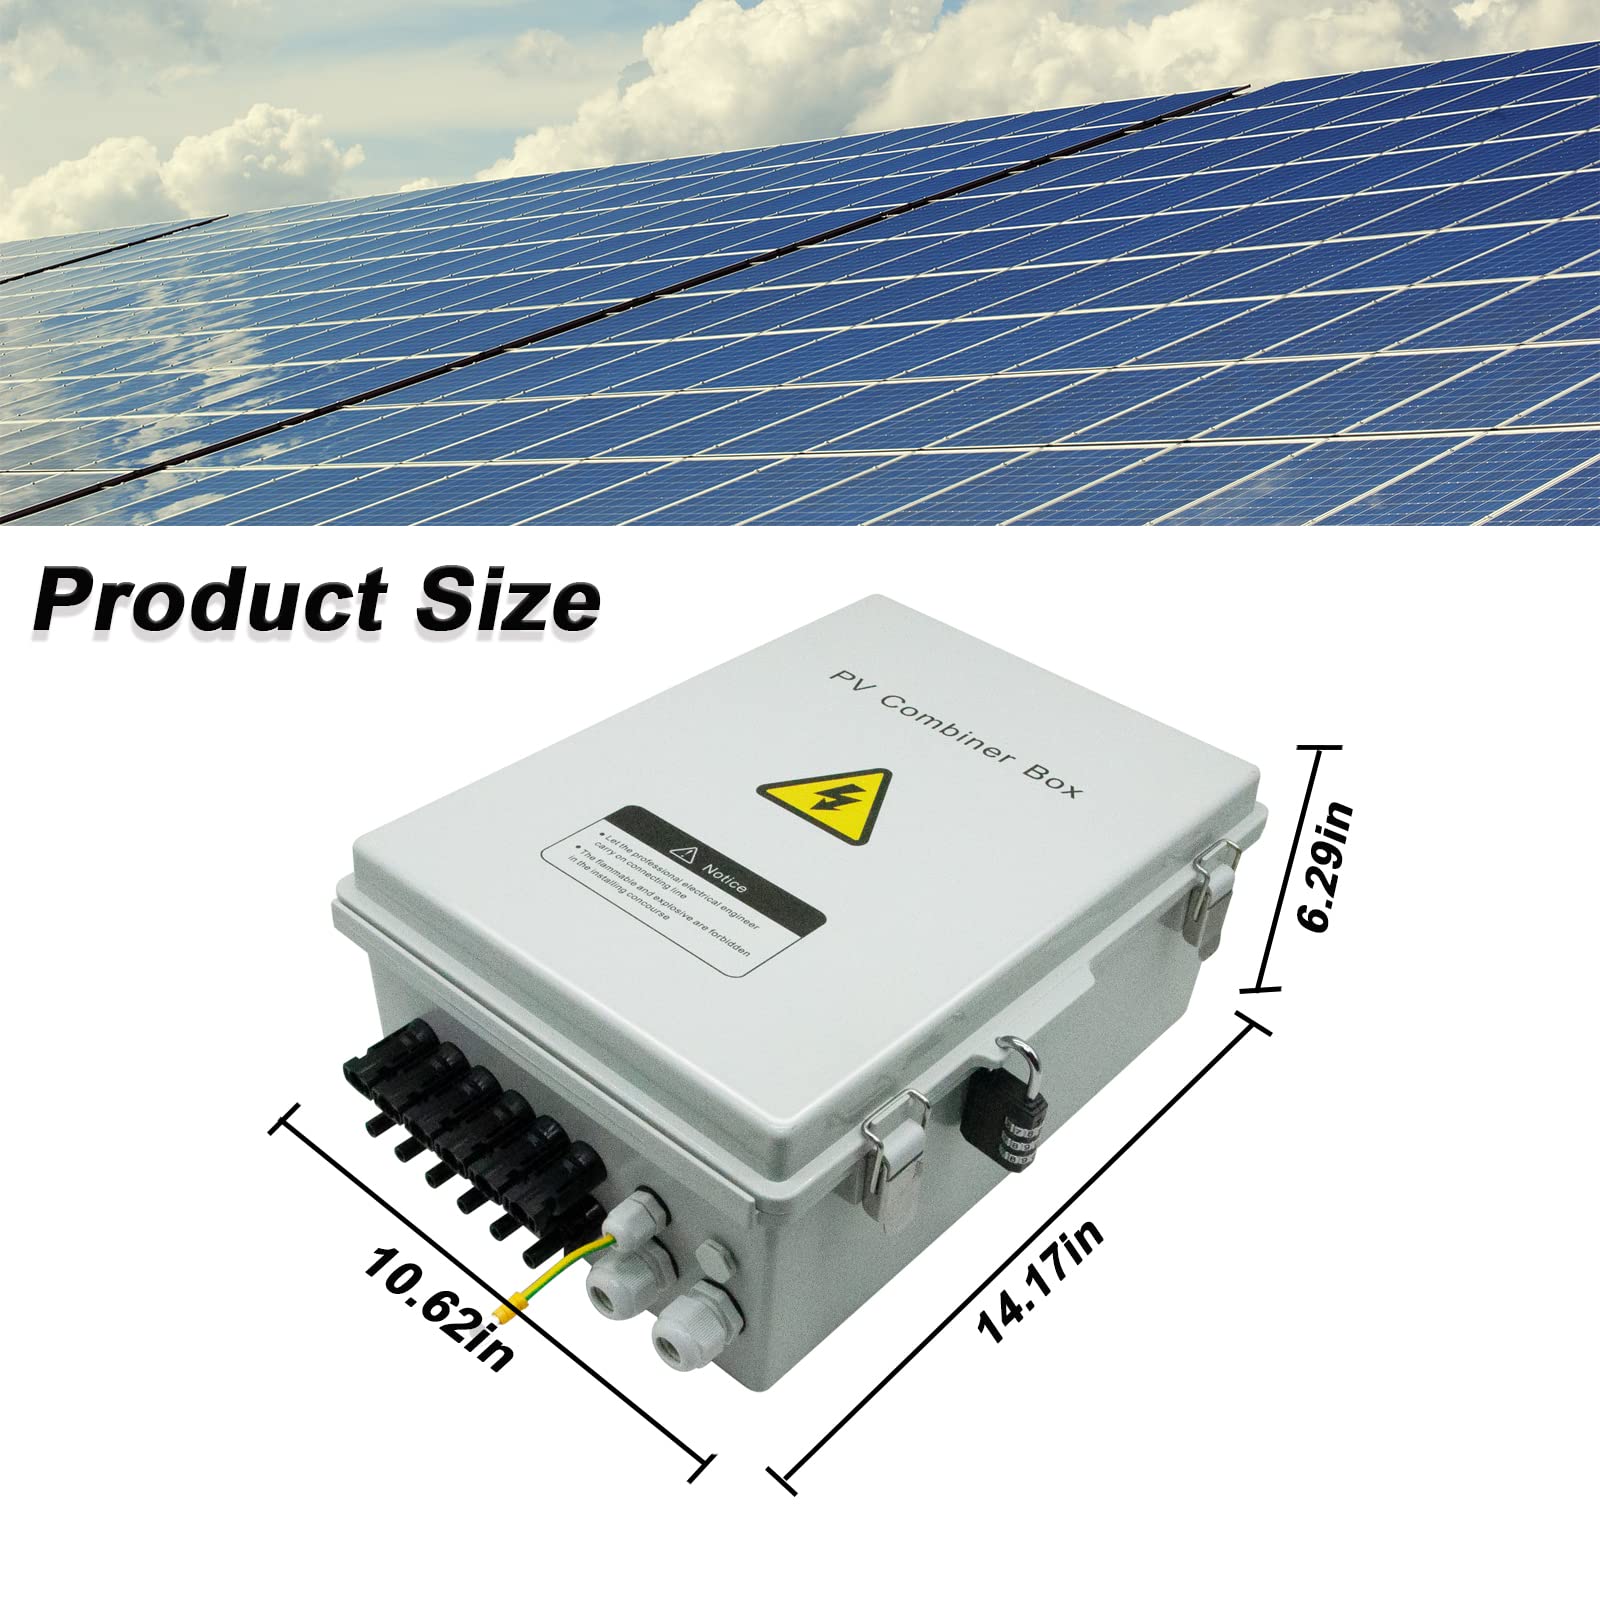 DEEKOOL Upgraded 6 String Solar Combiner Box, PV Combiner Box with 63A Air Circuit Breaker, and IP65 Waterproof for Solar Panel System